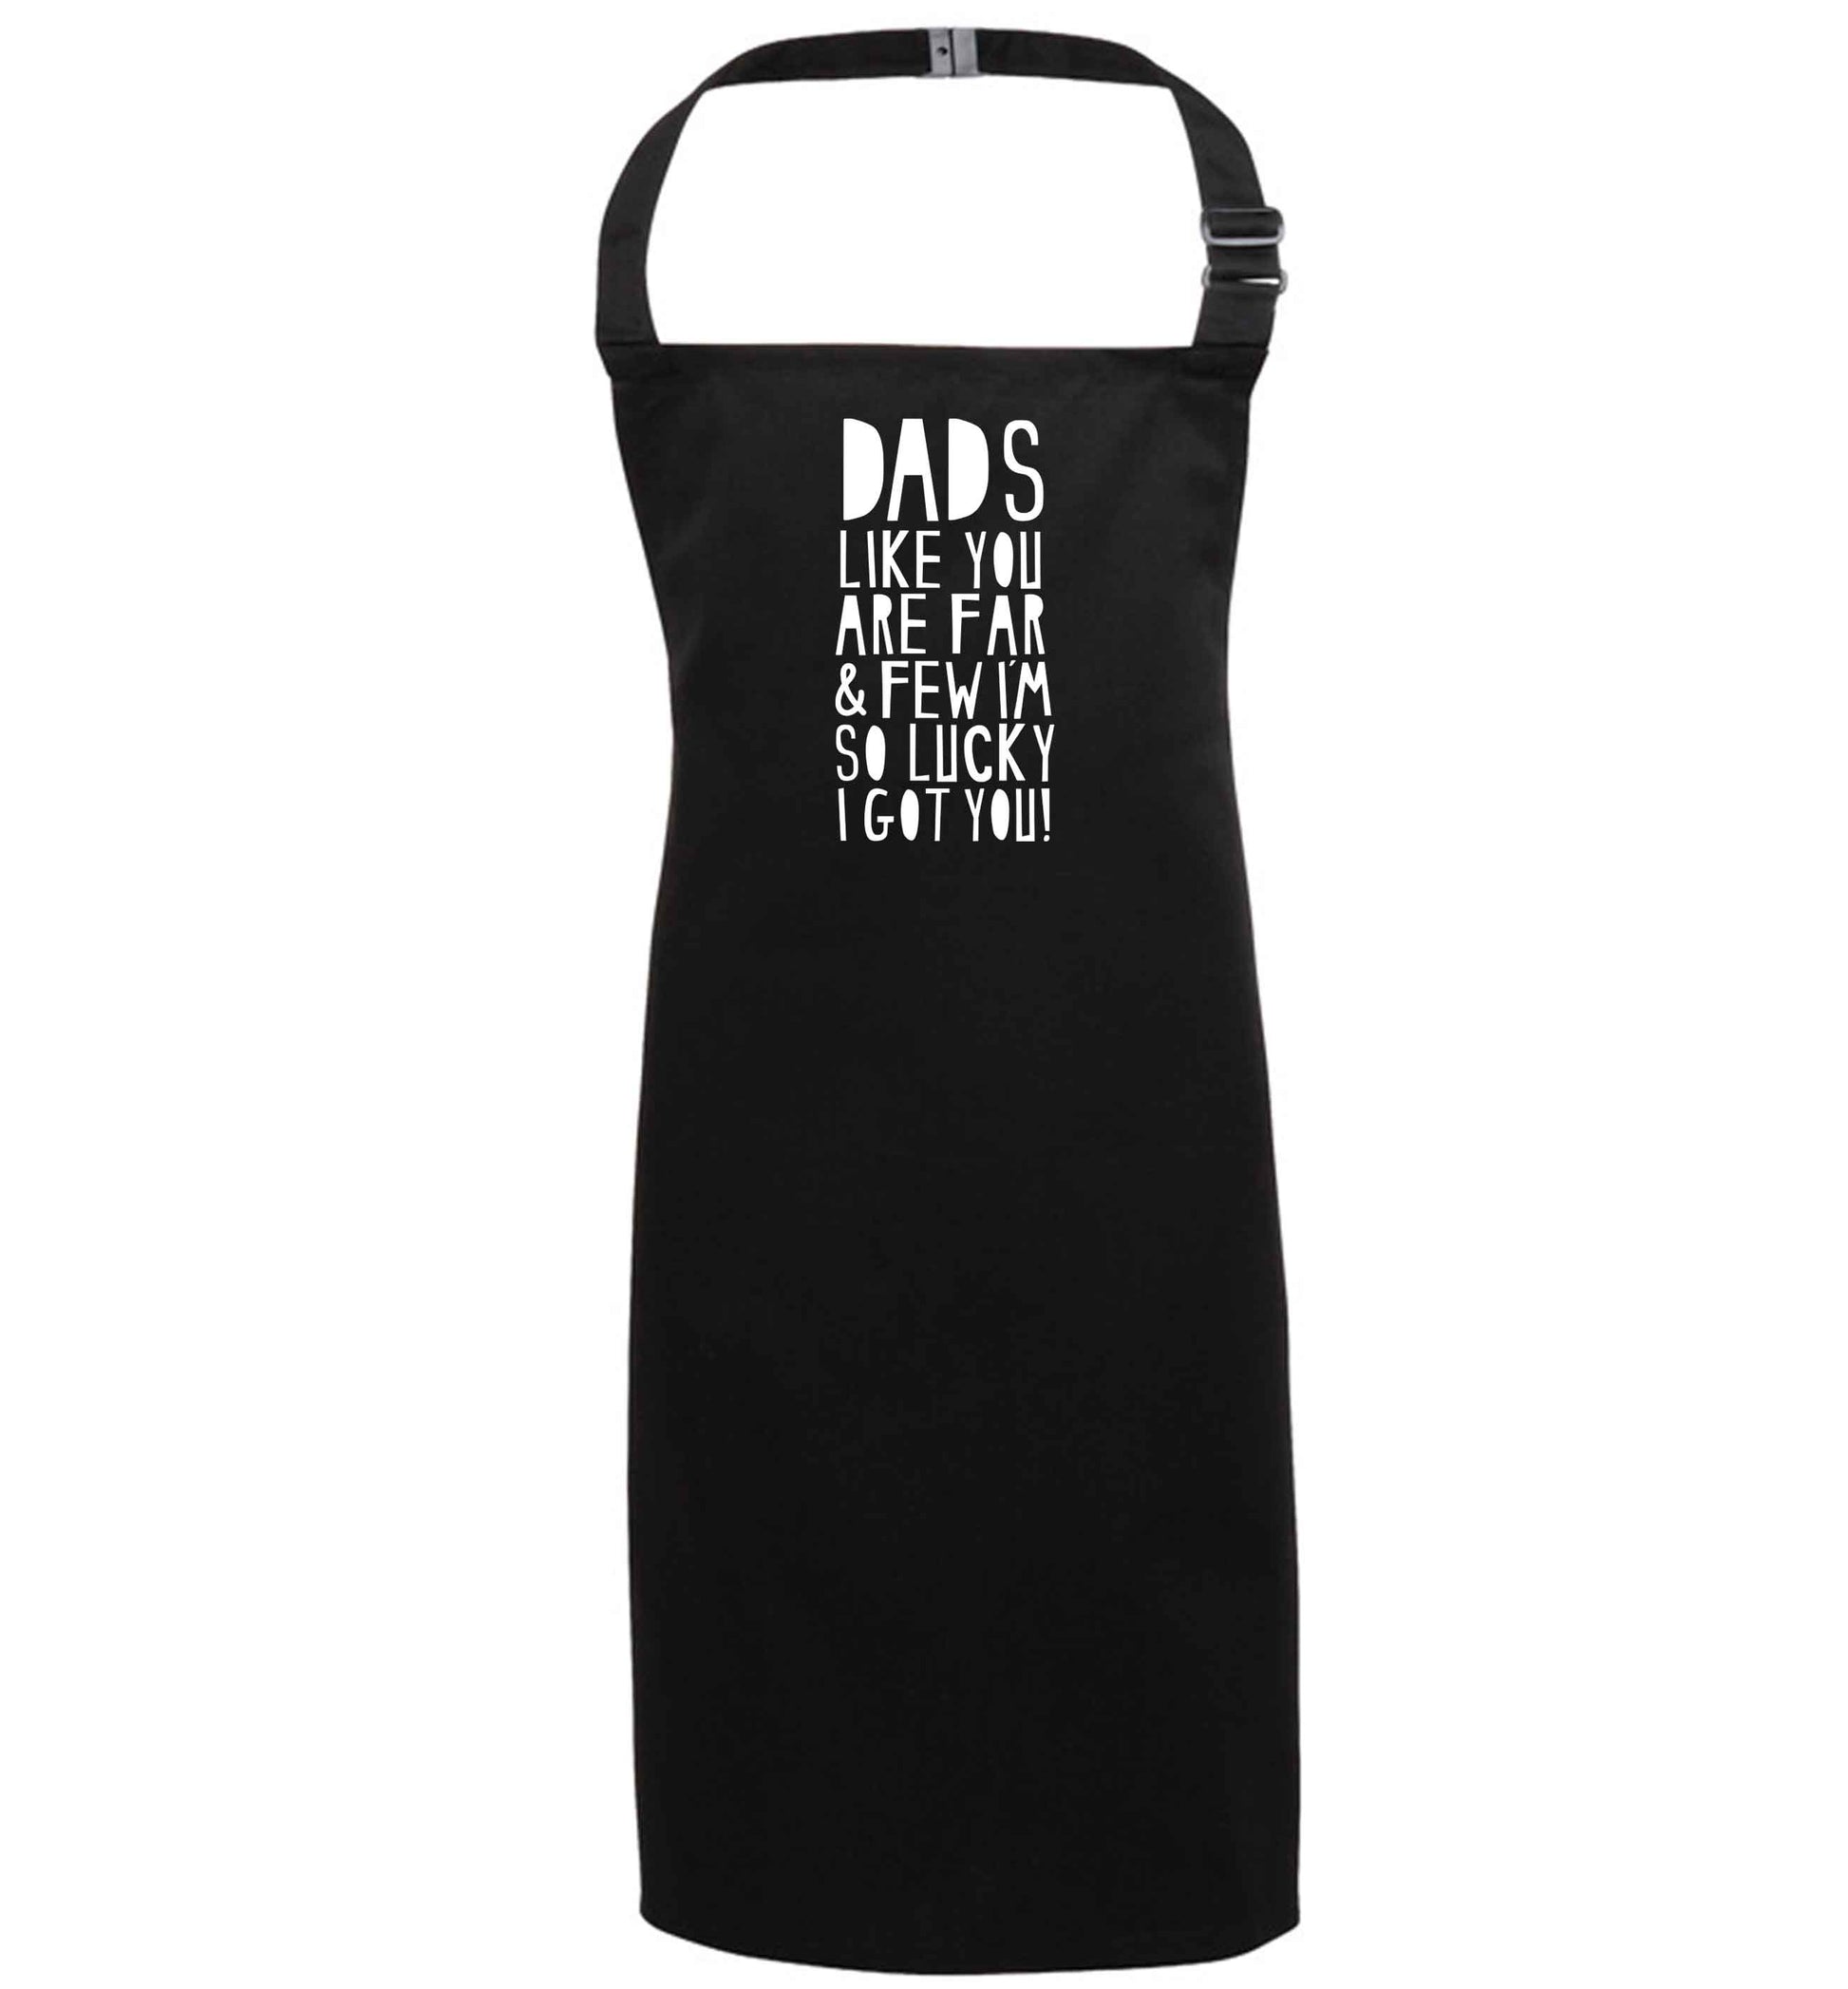 Dads like you are far and few I'm so luck I got you! black apron 7-10 years